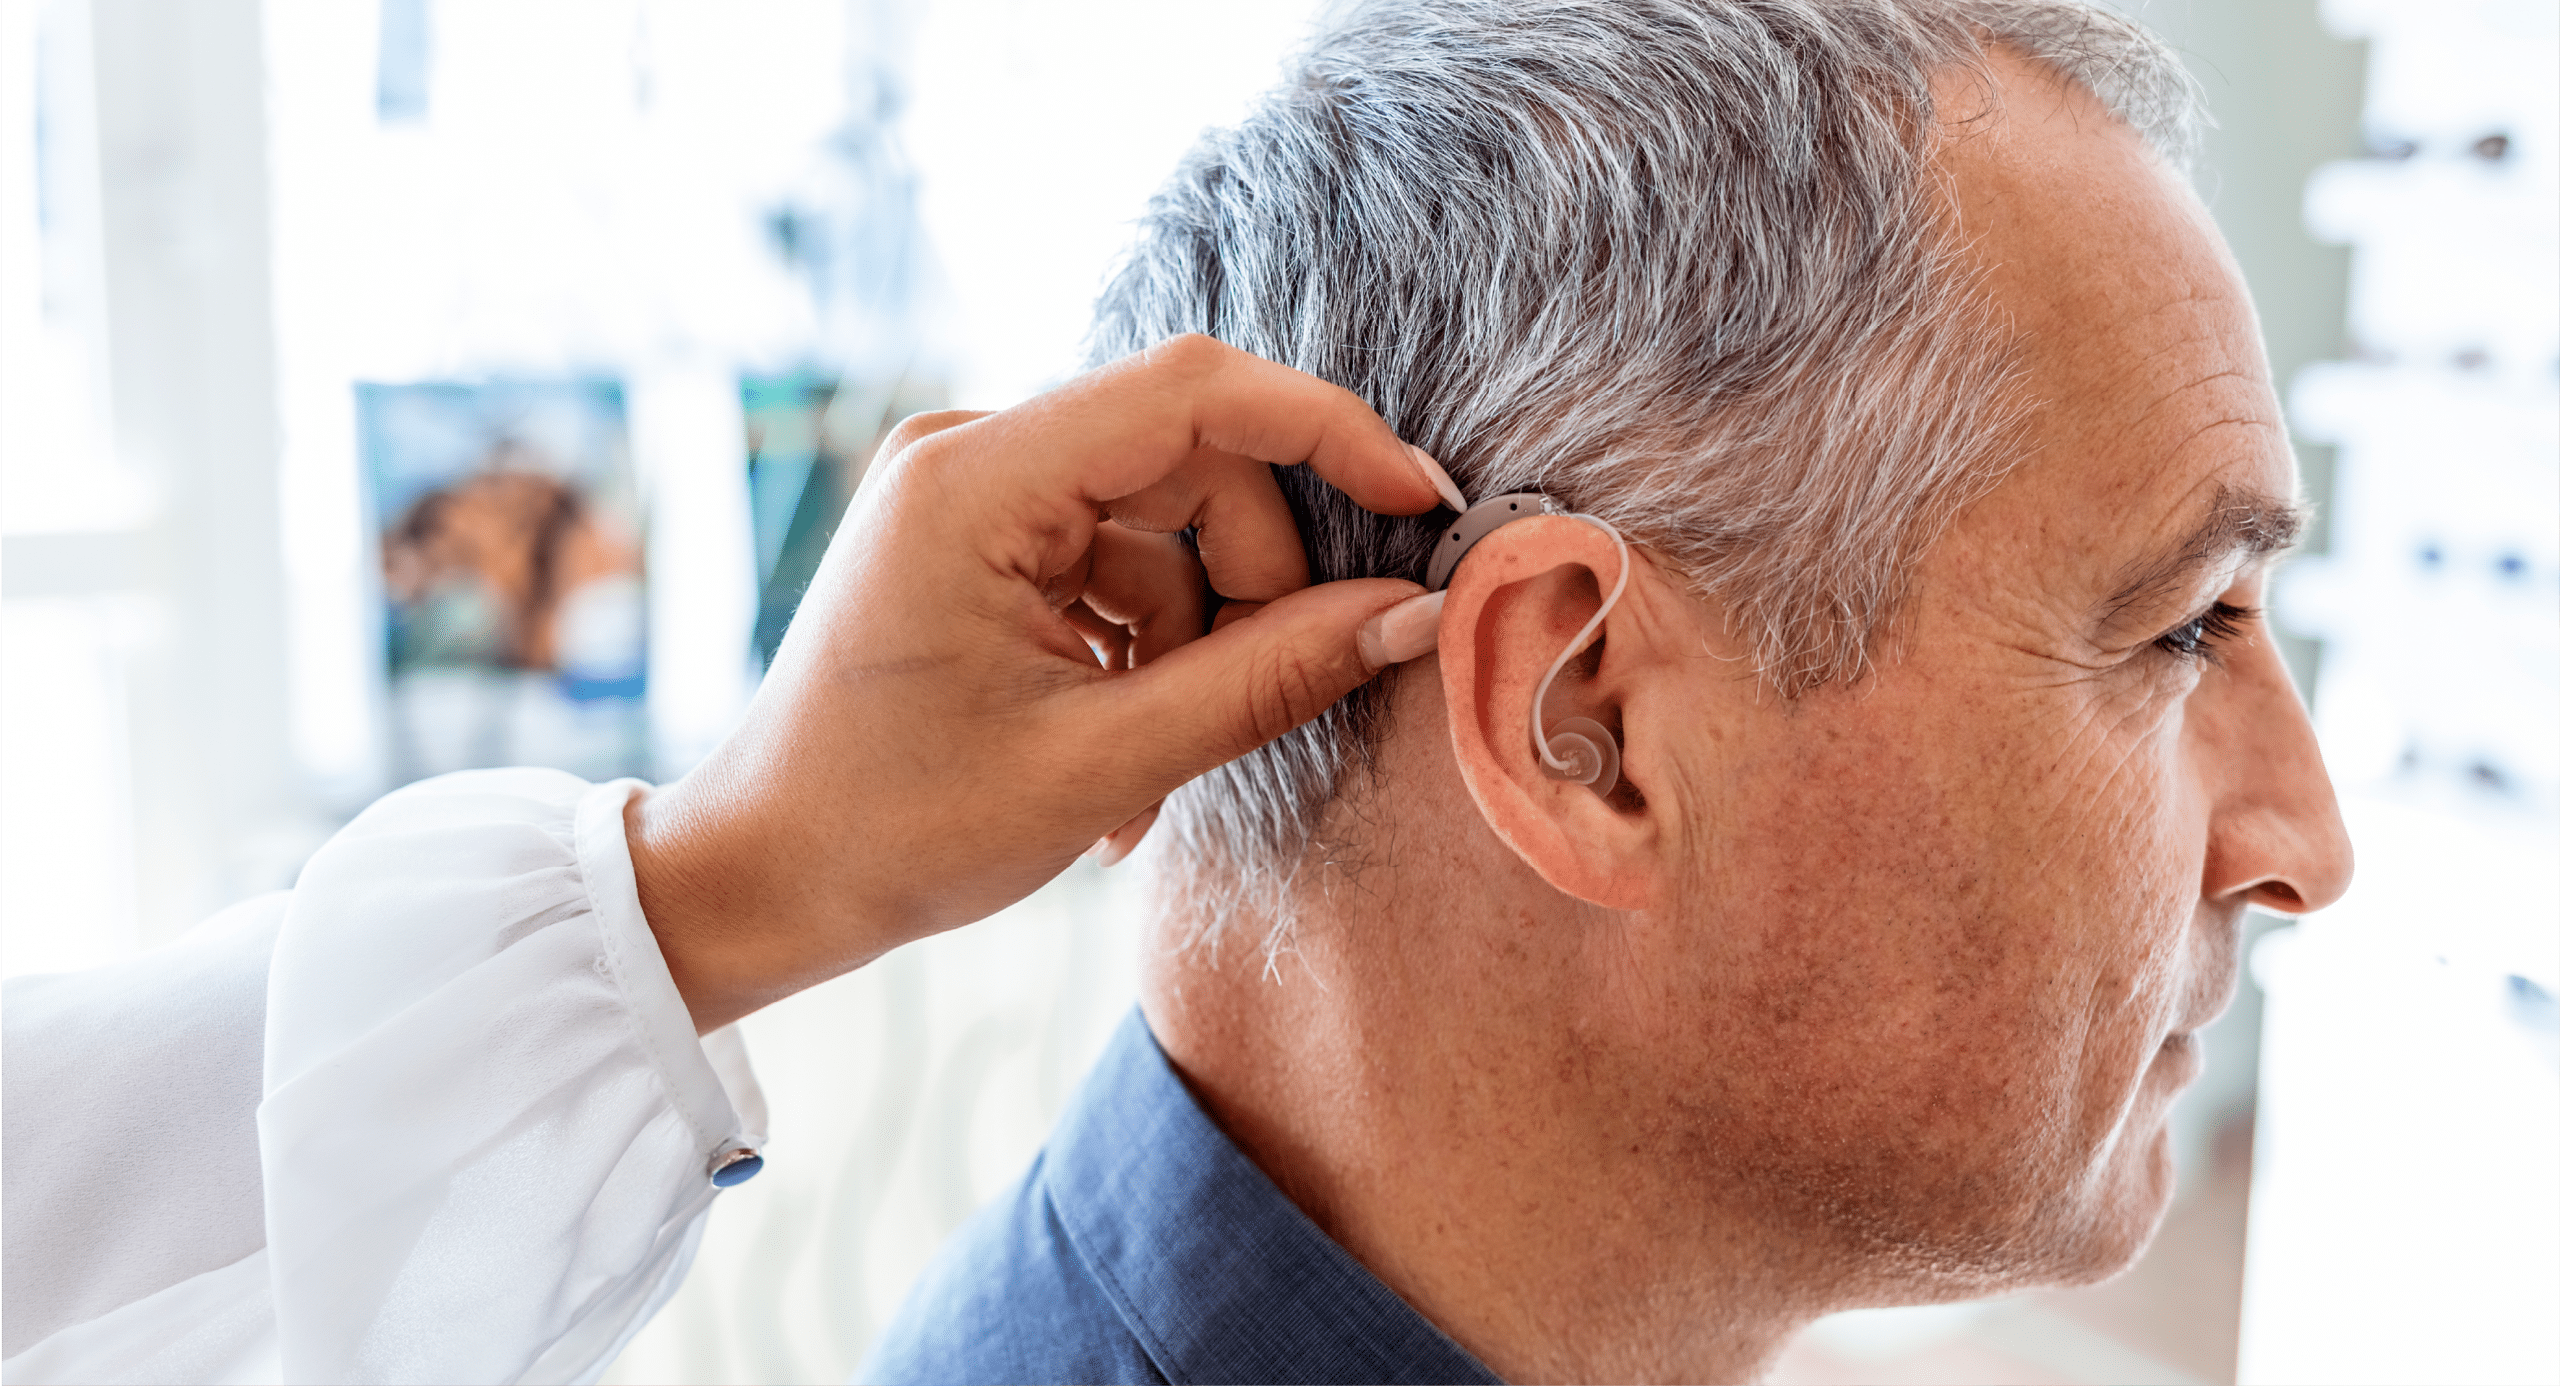 Invest in your health and wellness with personalized hearing care